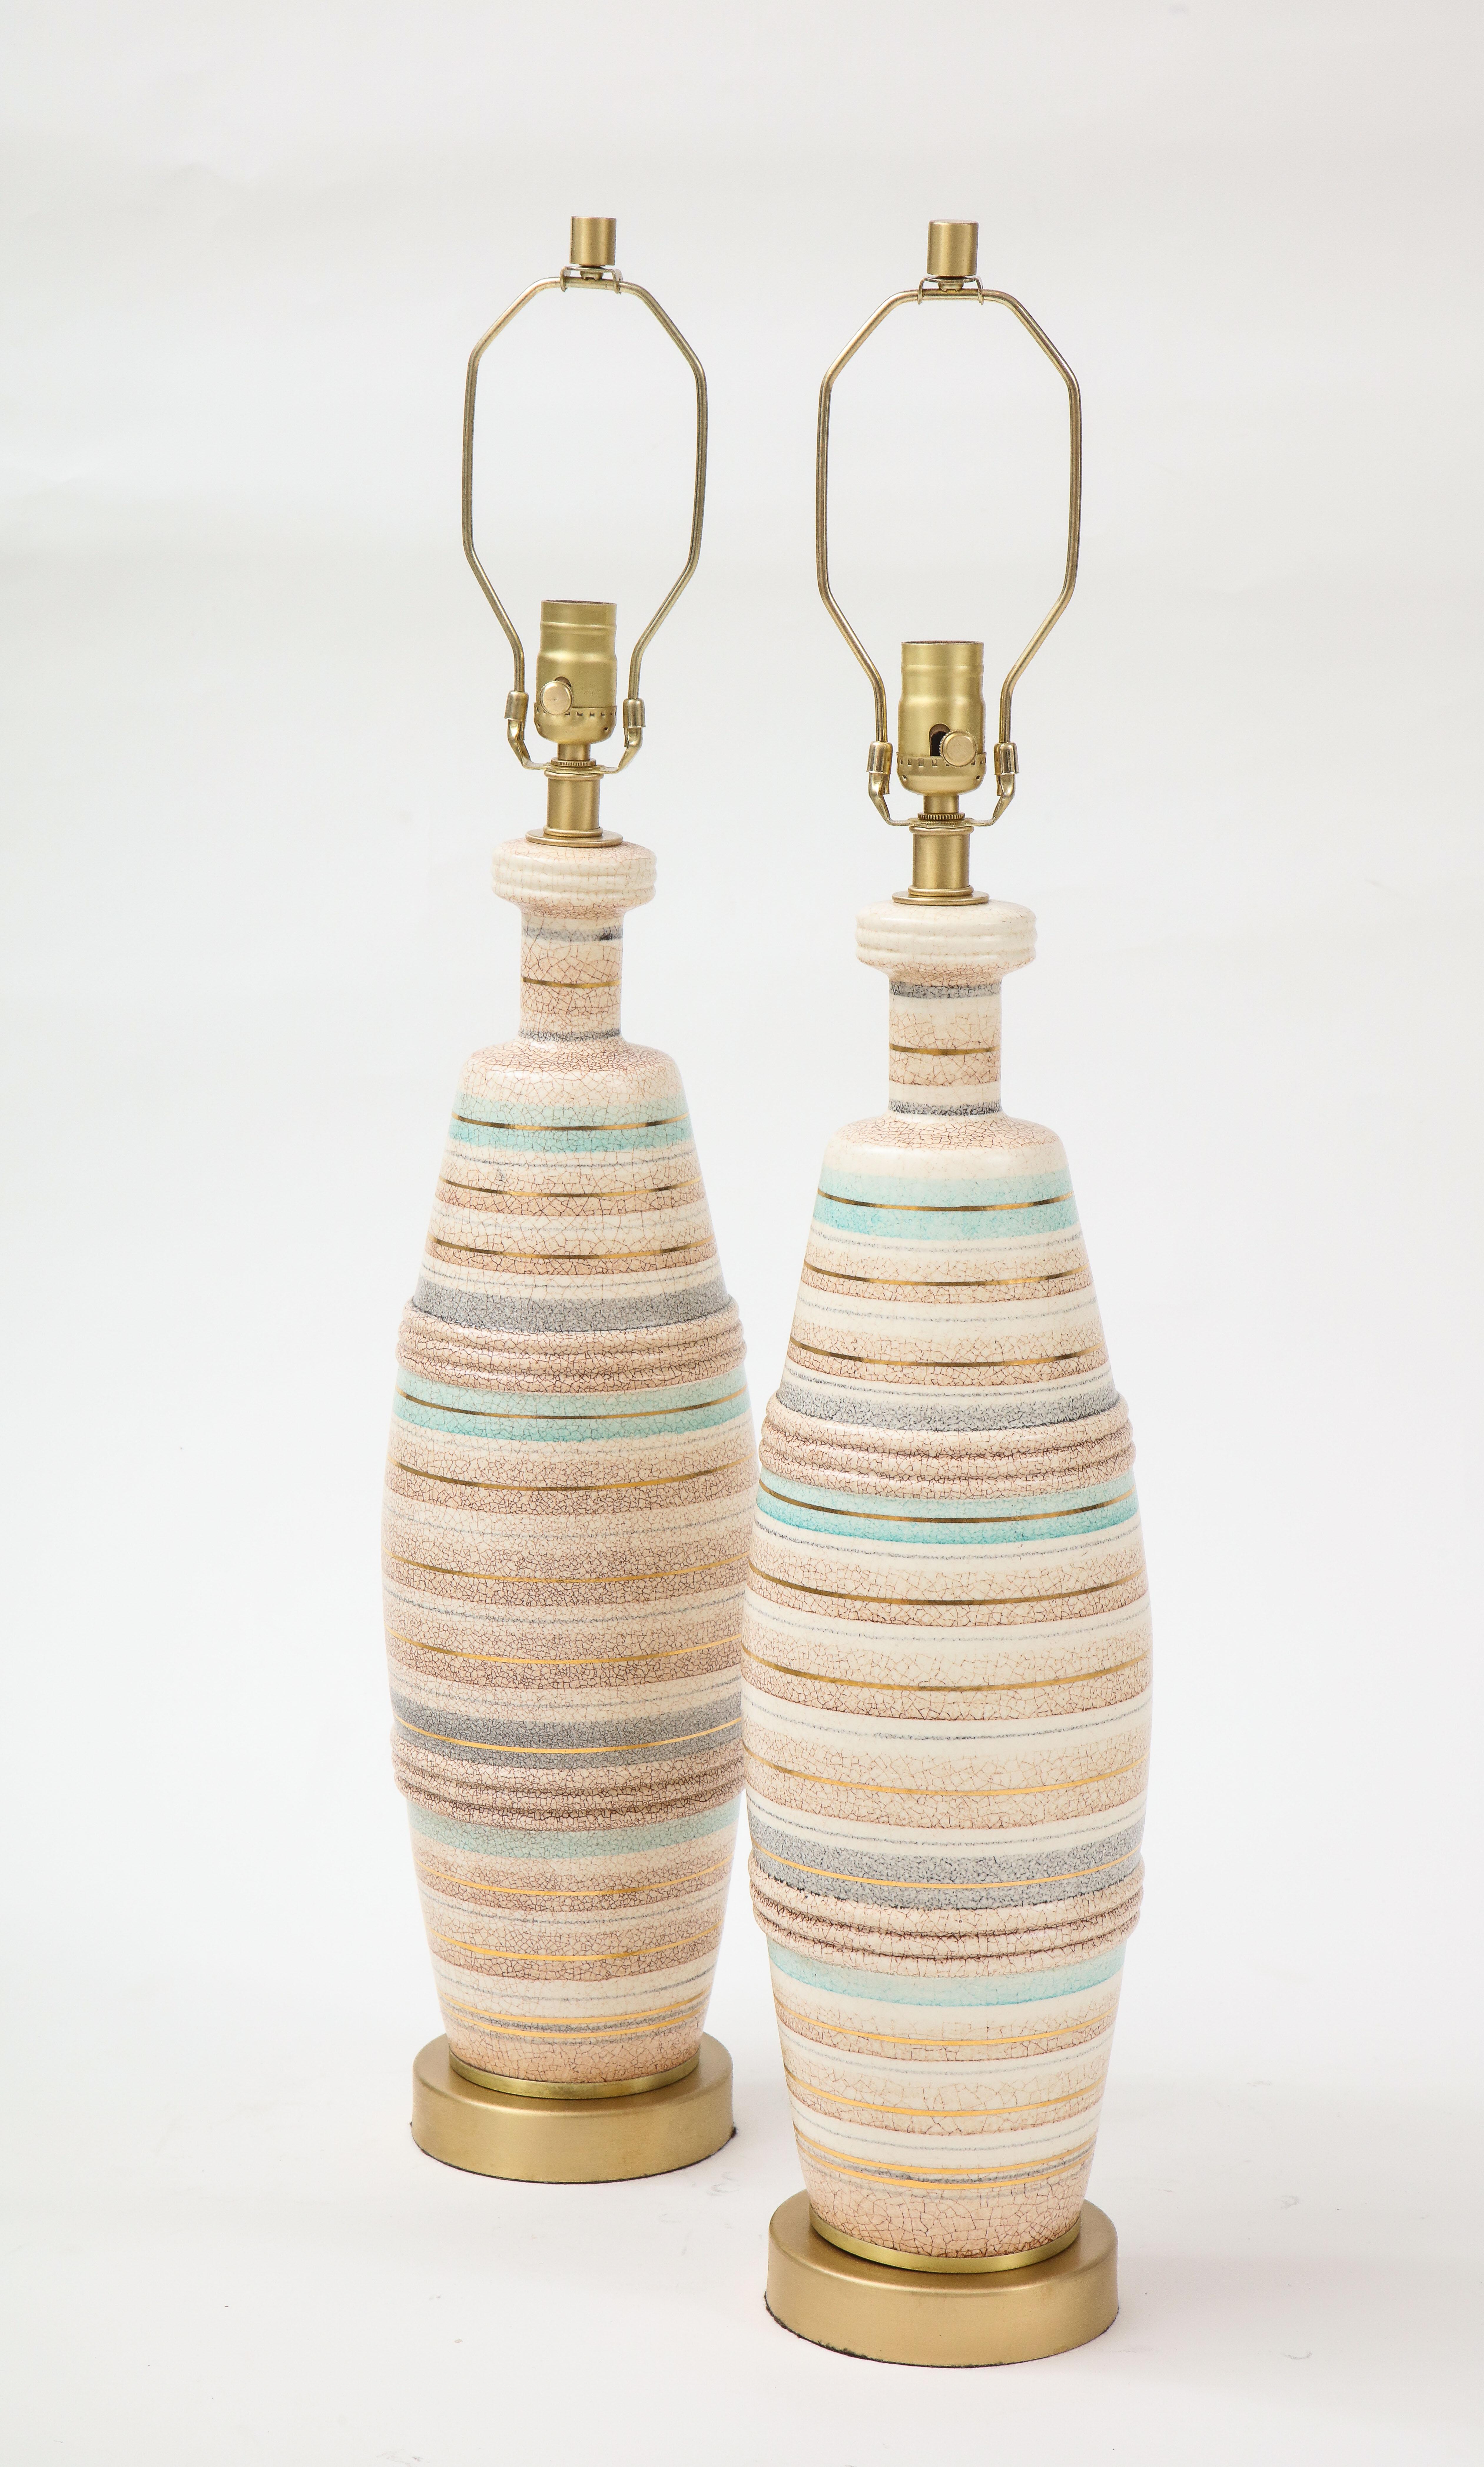 Exquisite pair of ceramic lamps featuring seaside colorful bands of tan, ivory, grey and ocean green accented with gold pinstripes, sitting on brushed brass bases. Rewired for use in USA, 100W max.